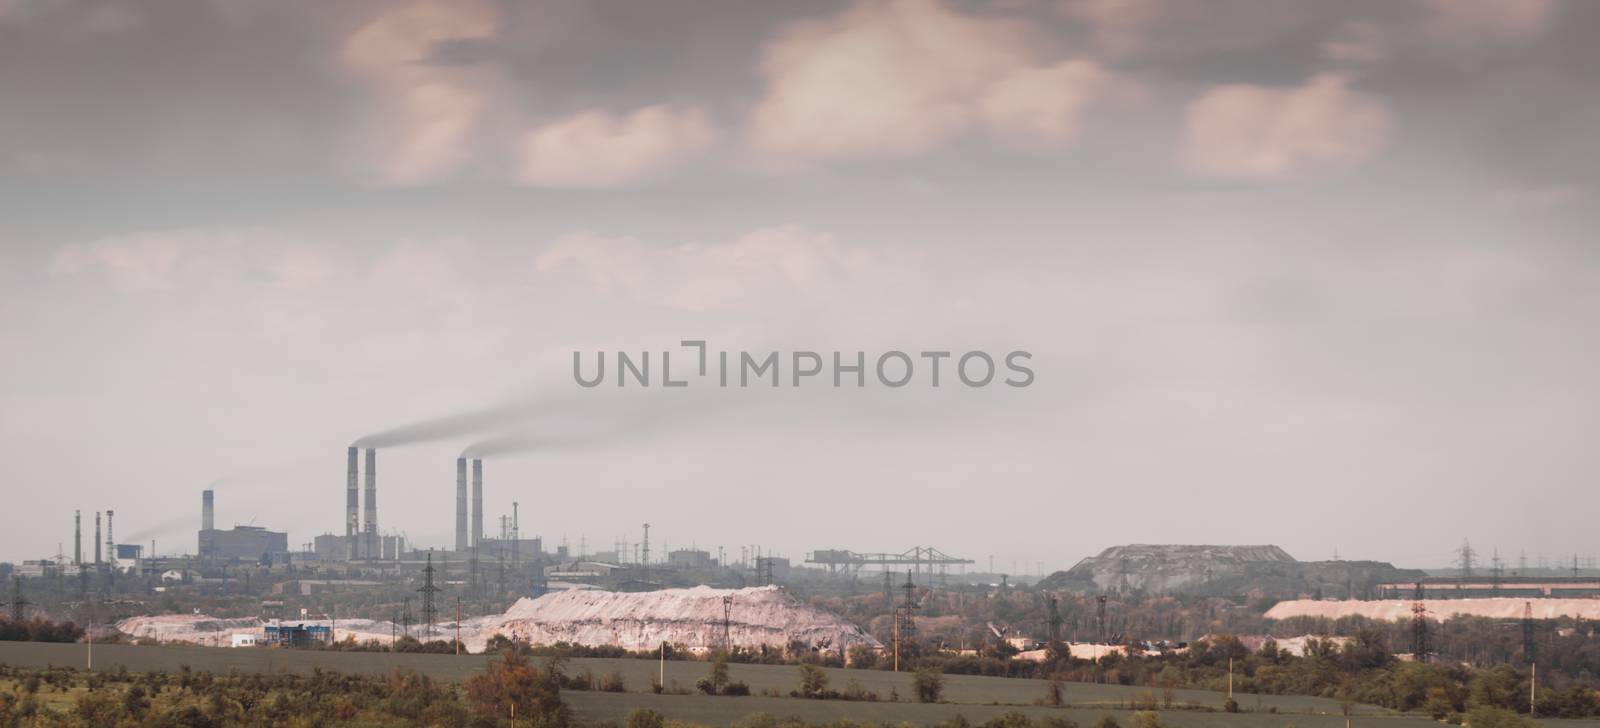 panorama view of the factory with smoking chimneys and the sky w by Gera8th